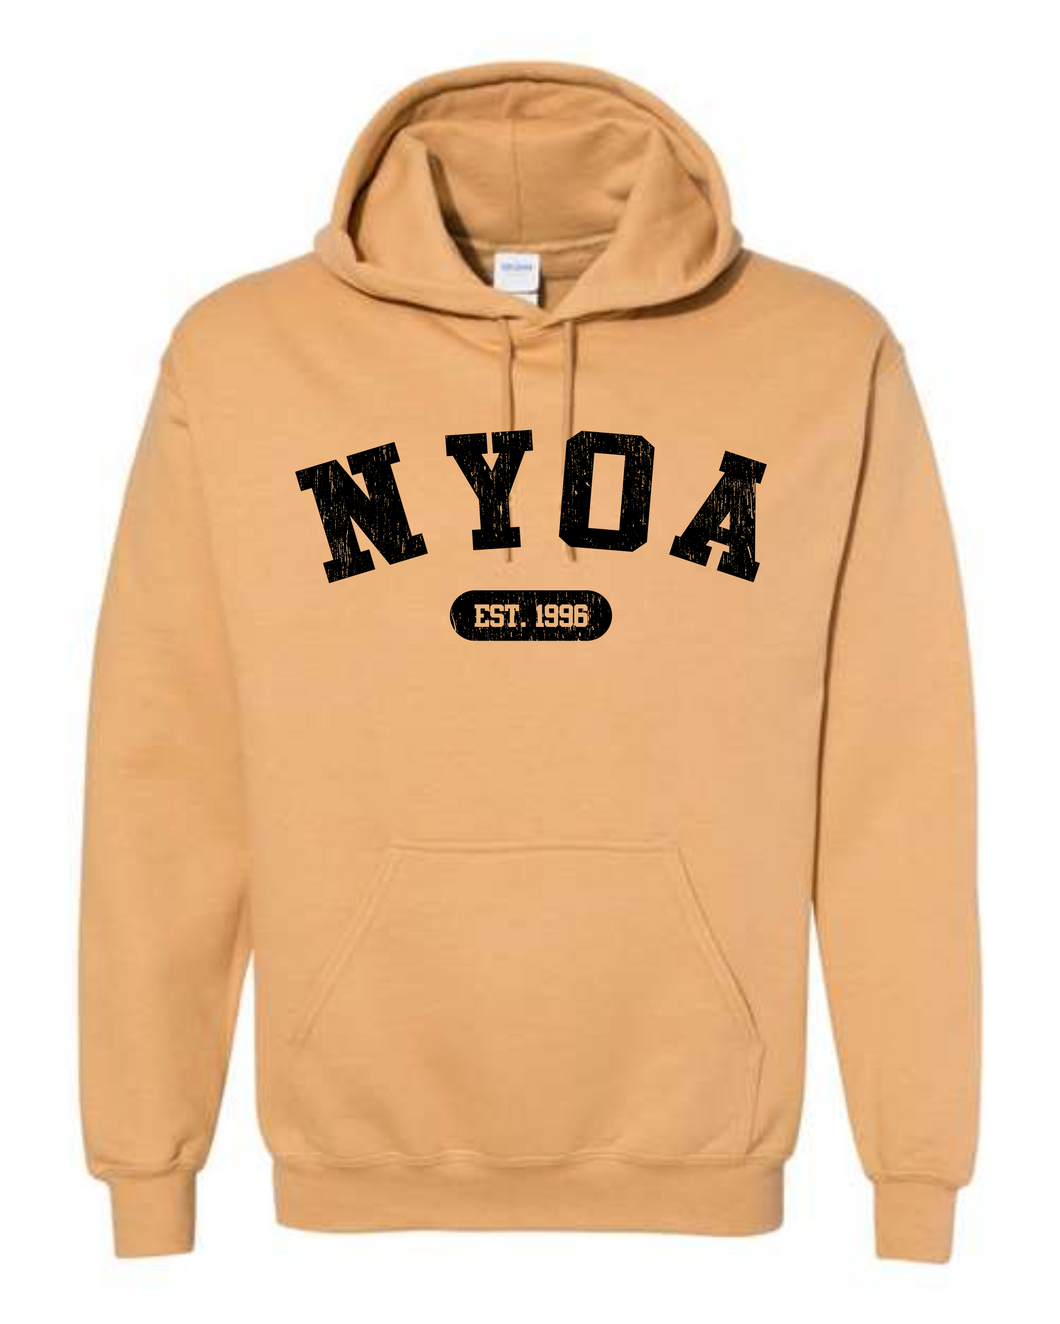 NYOA EST Hoodie Old Gold